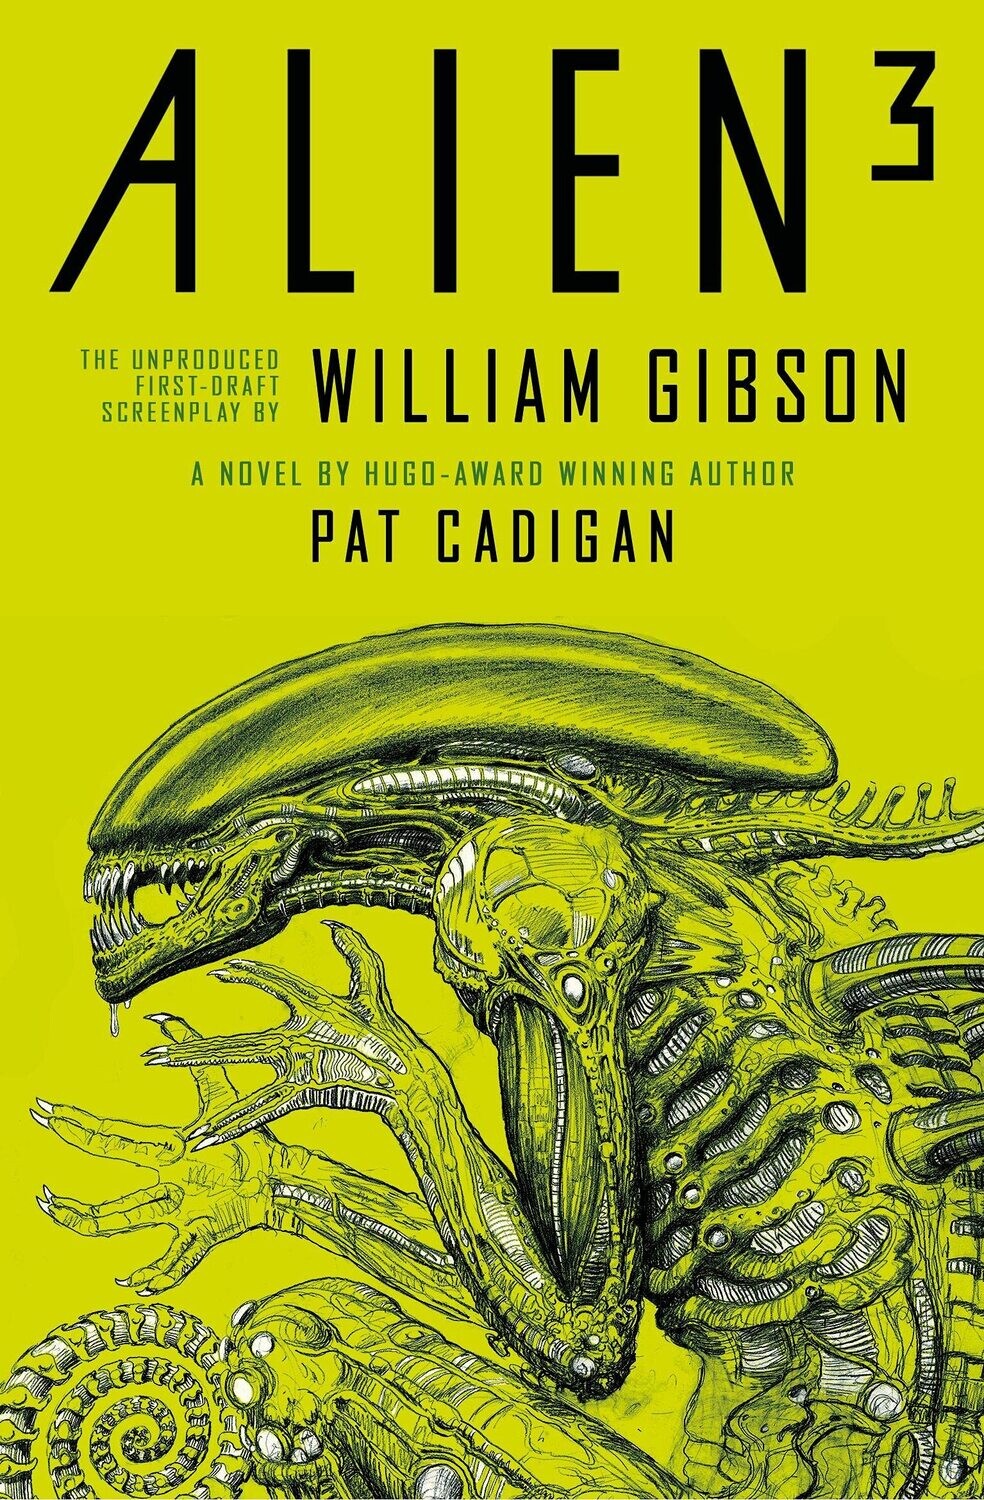 William Gibson's Alien 3: The Unproduced Screenplay (Hardcover, NEW)